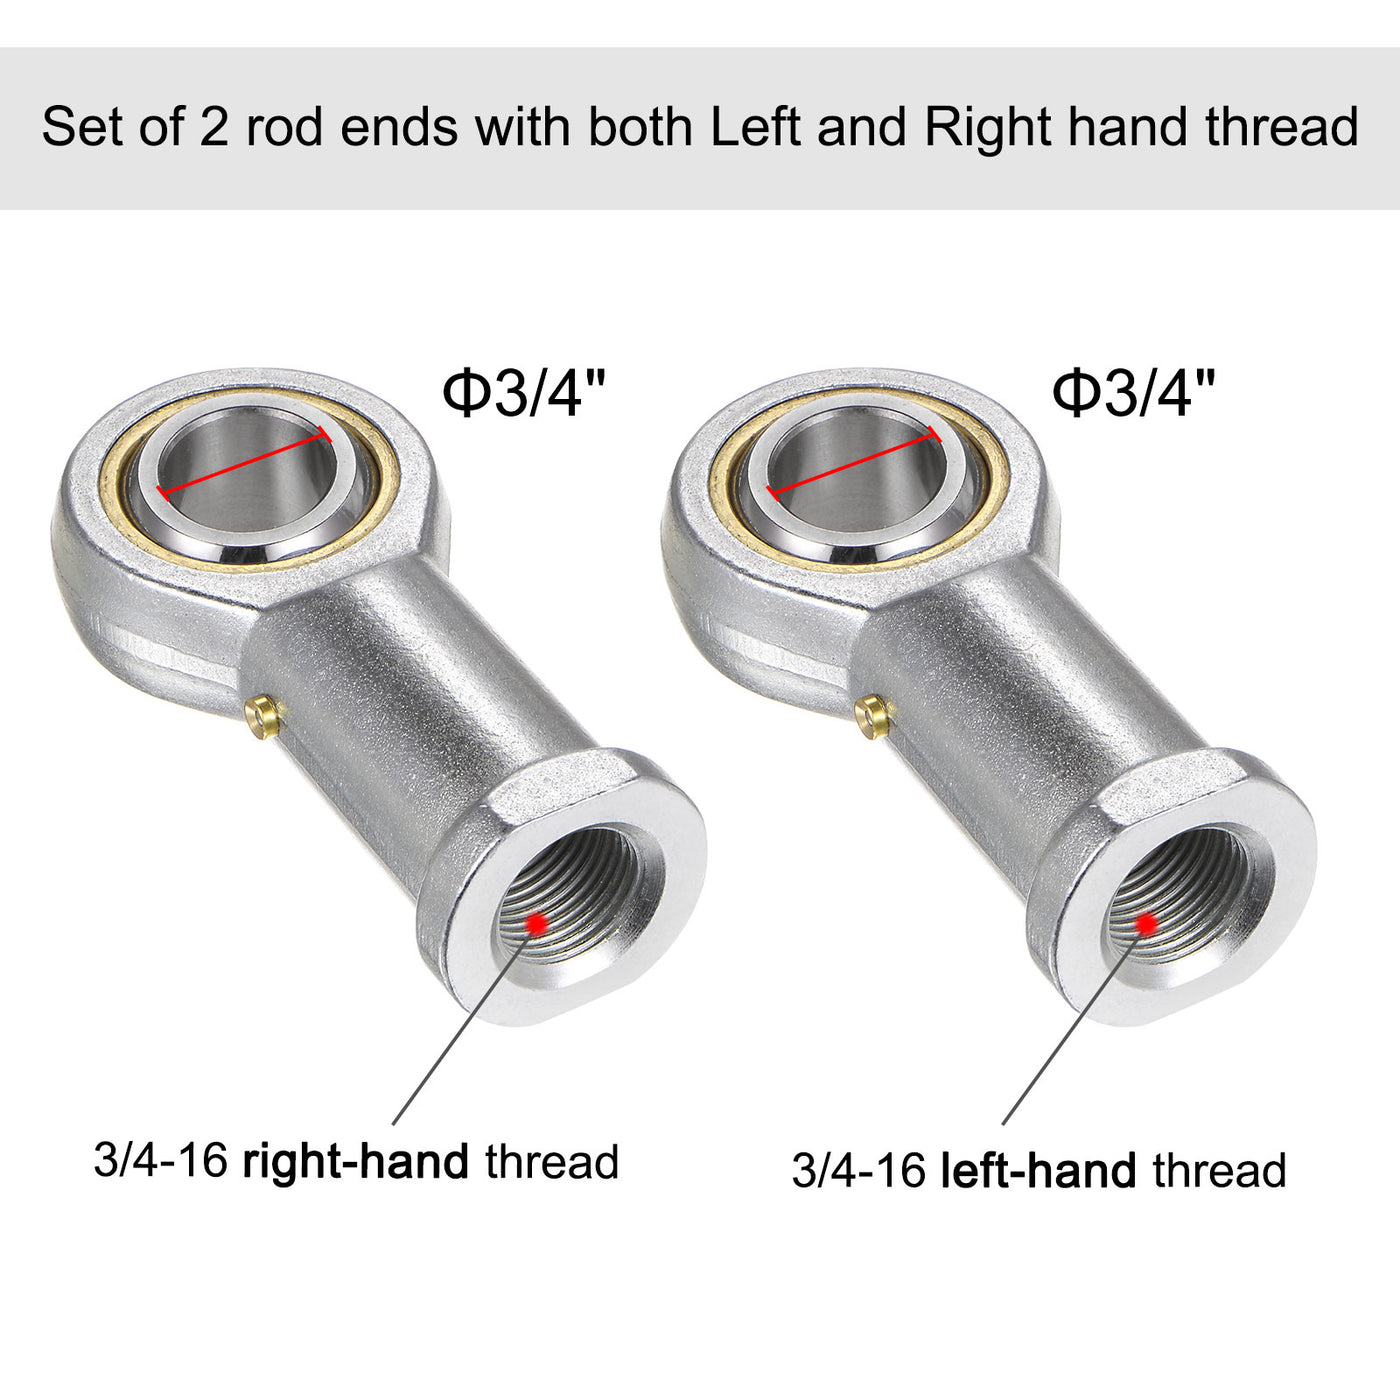 uxcell Uxcell PHSB12 3/4" Female Rod End Set - 2pcs of 3/4-16 Left & Right Thread with Jam Nut